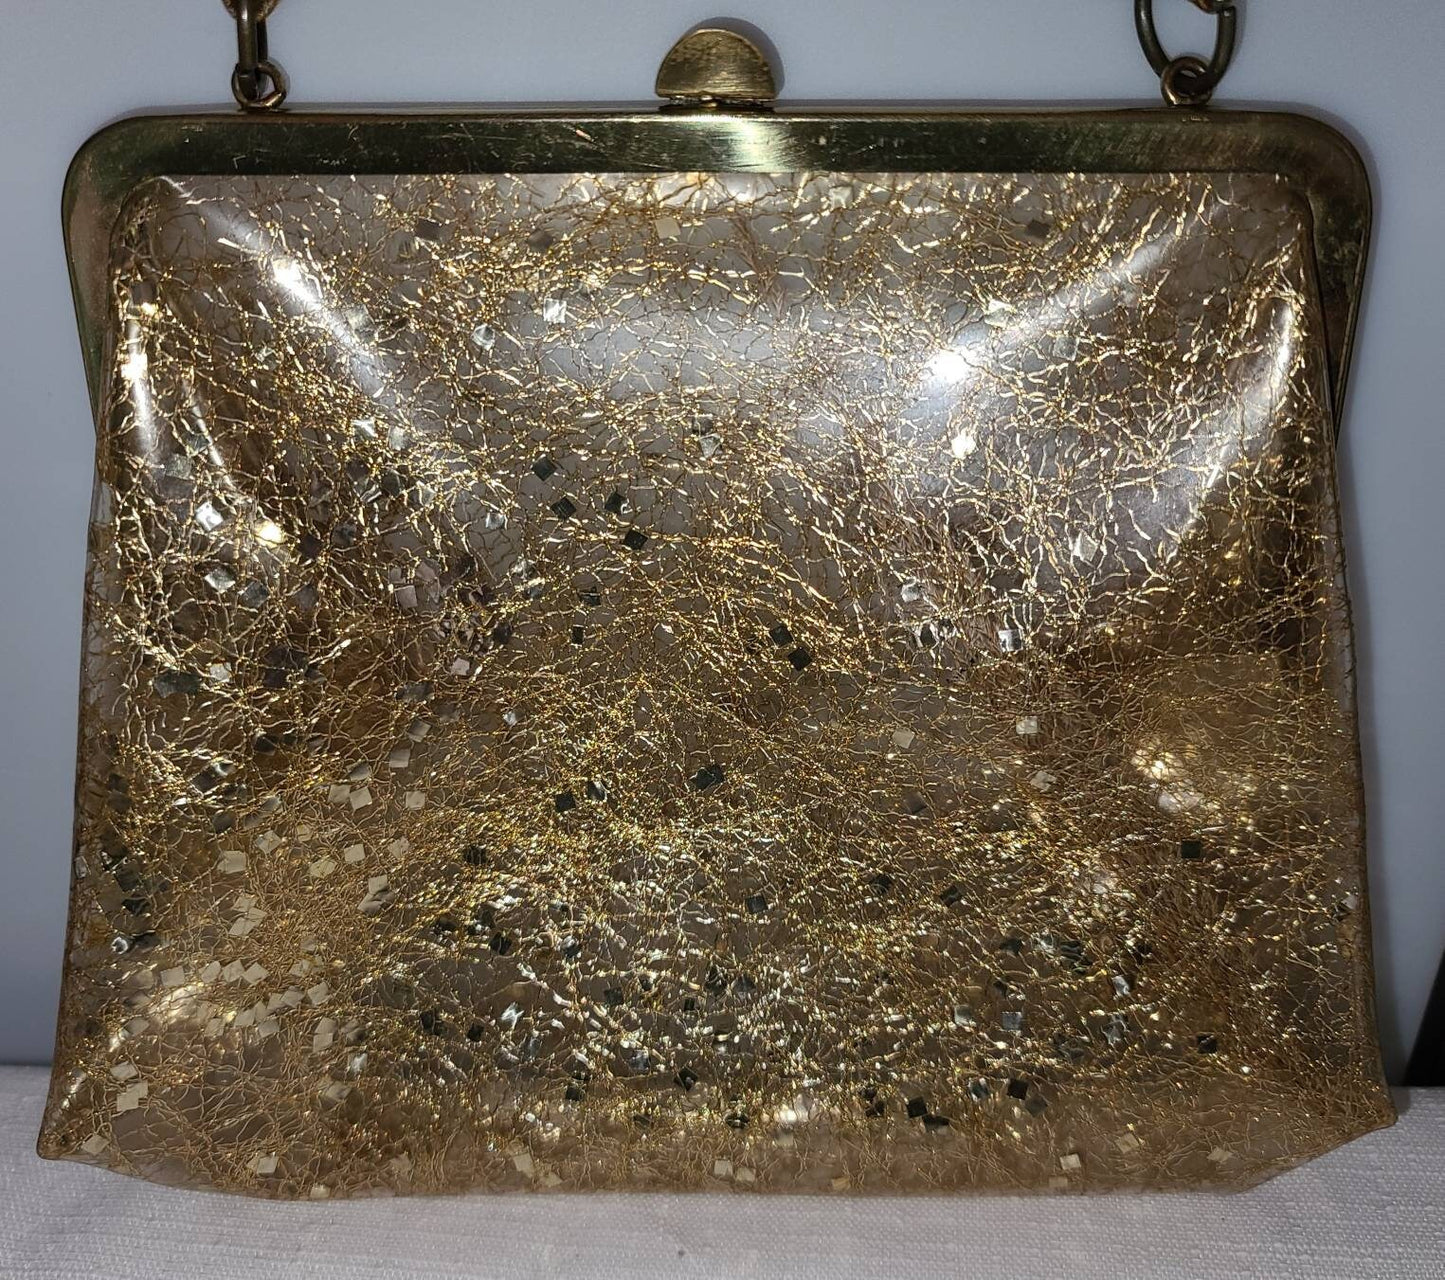 SALE Vintage 1950s Purse Small Clear Vinyl Gold Tinsel Chunky Glitter Top Handle Purse Rockabilly